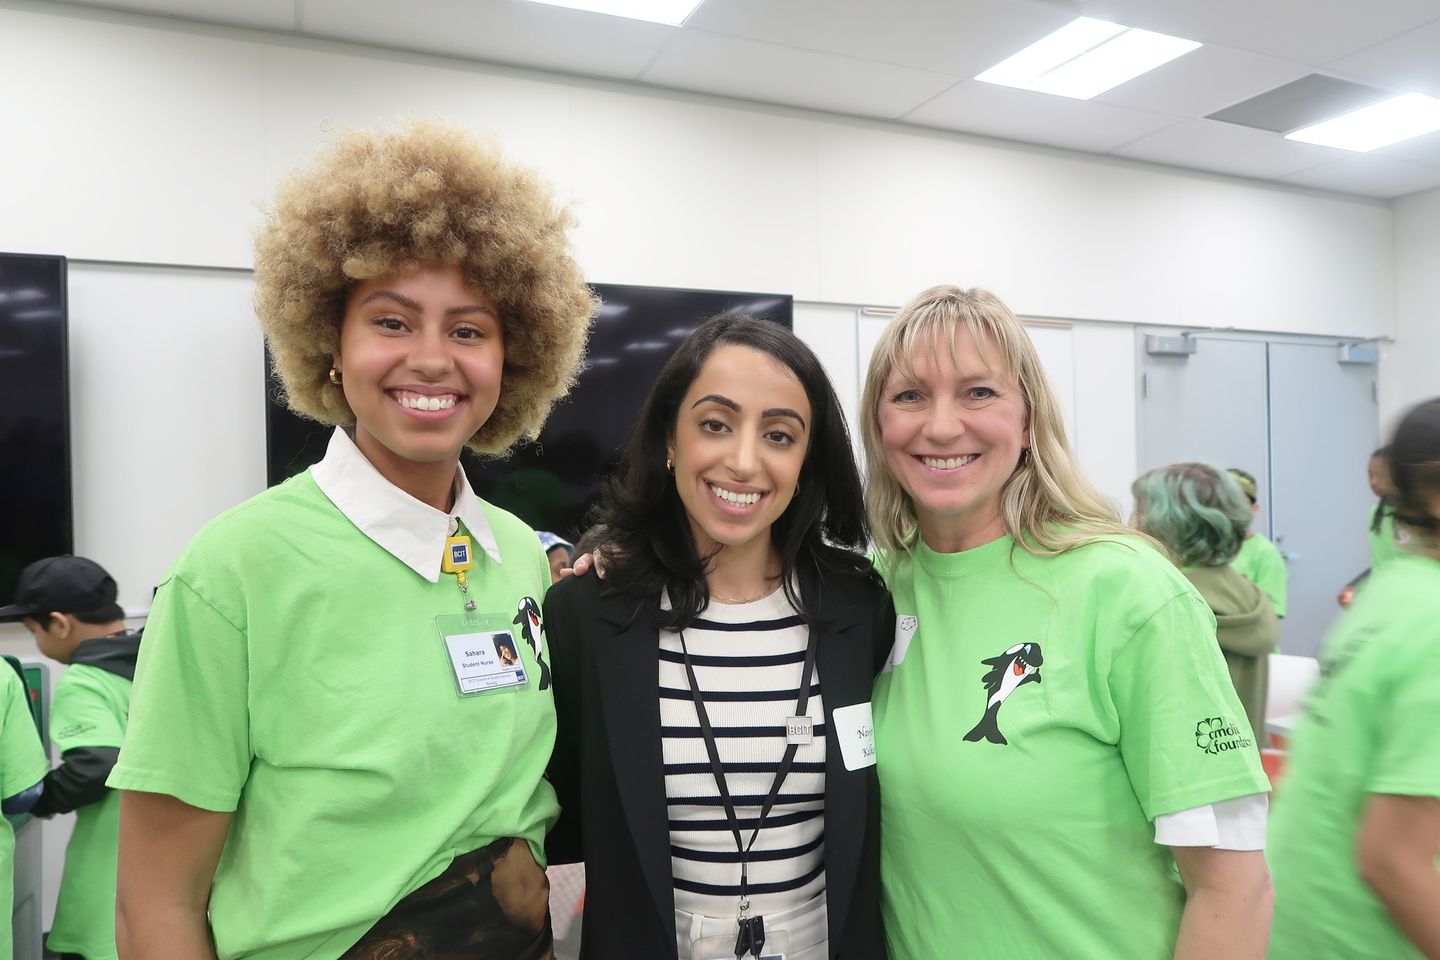 In recognition of National Nursing Week 2023 (May 8 – 14), we’re shining a light on Nav Padda (centre, middle) BCIT Nursing alumna and instructor at the BCIT School of Health Sciences.